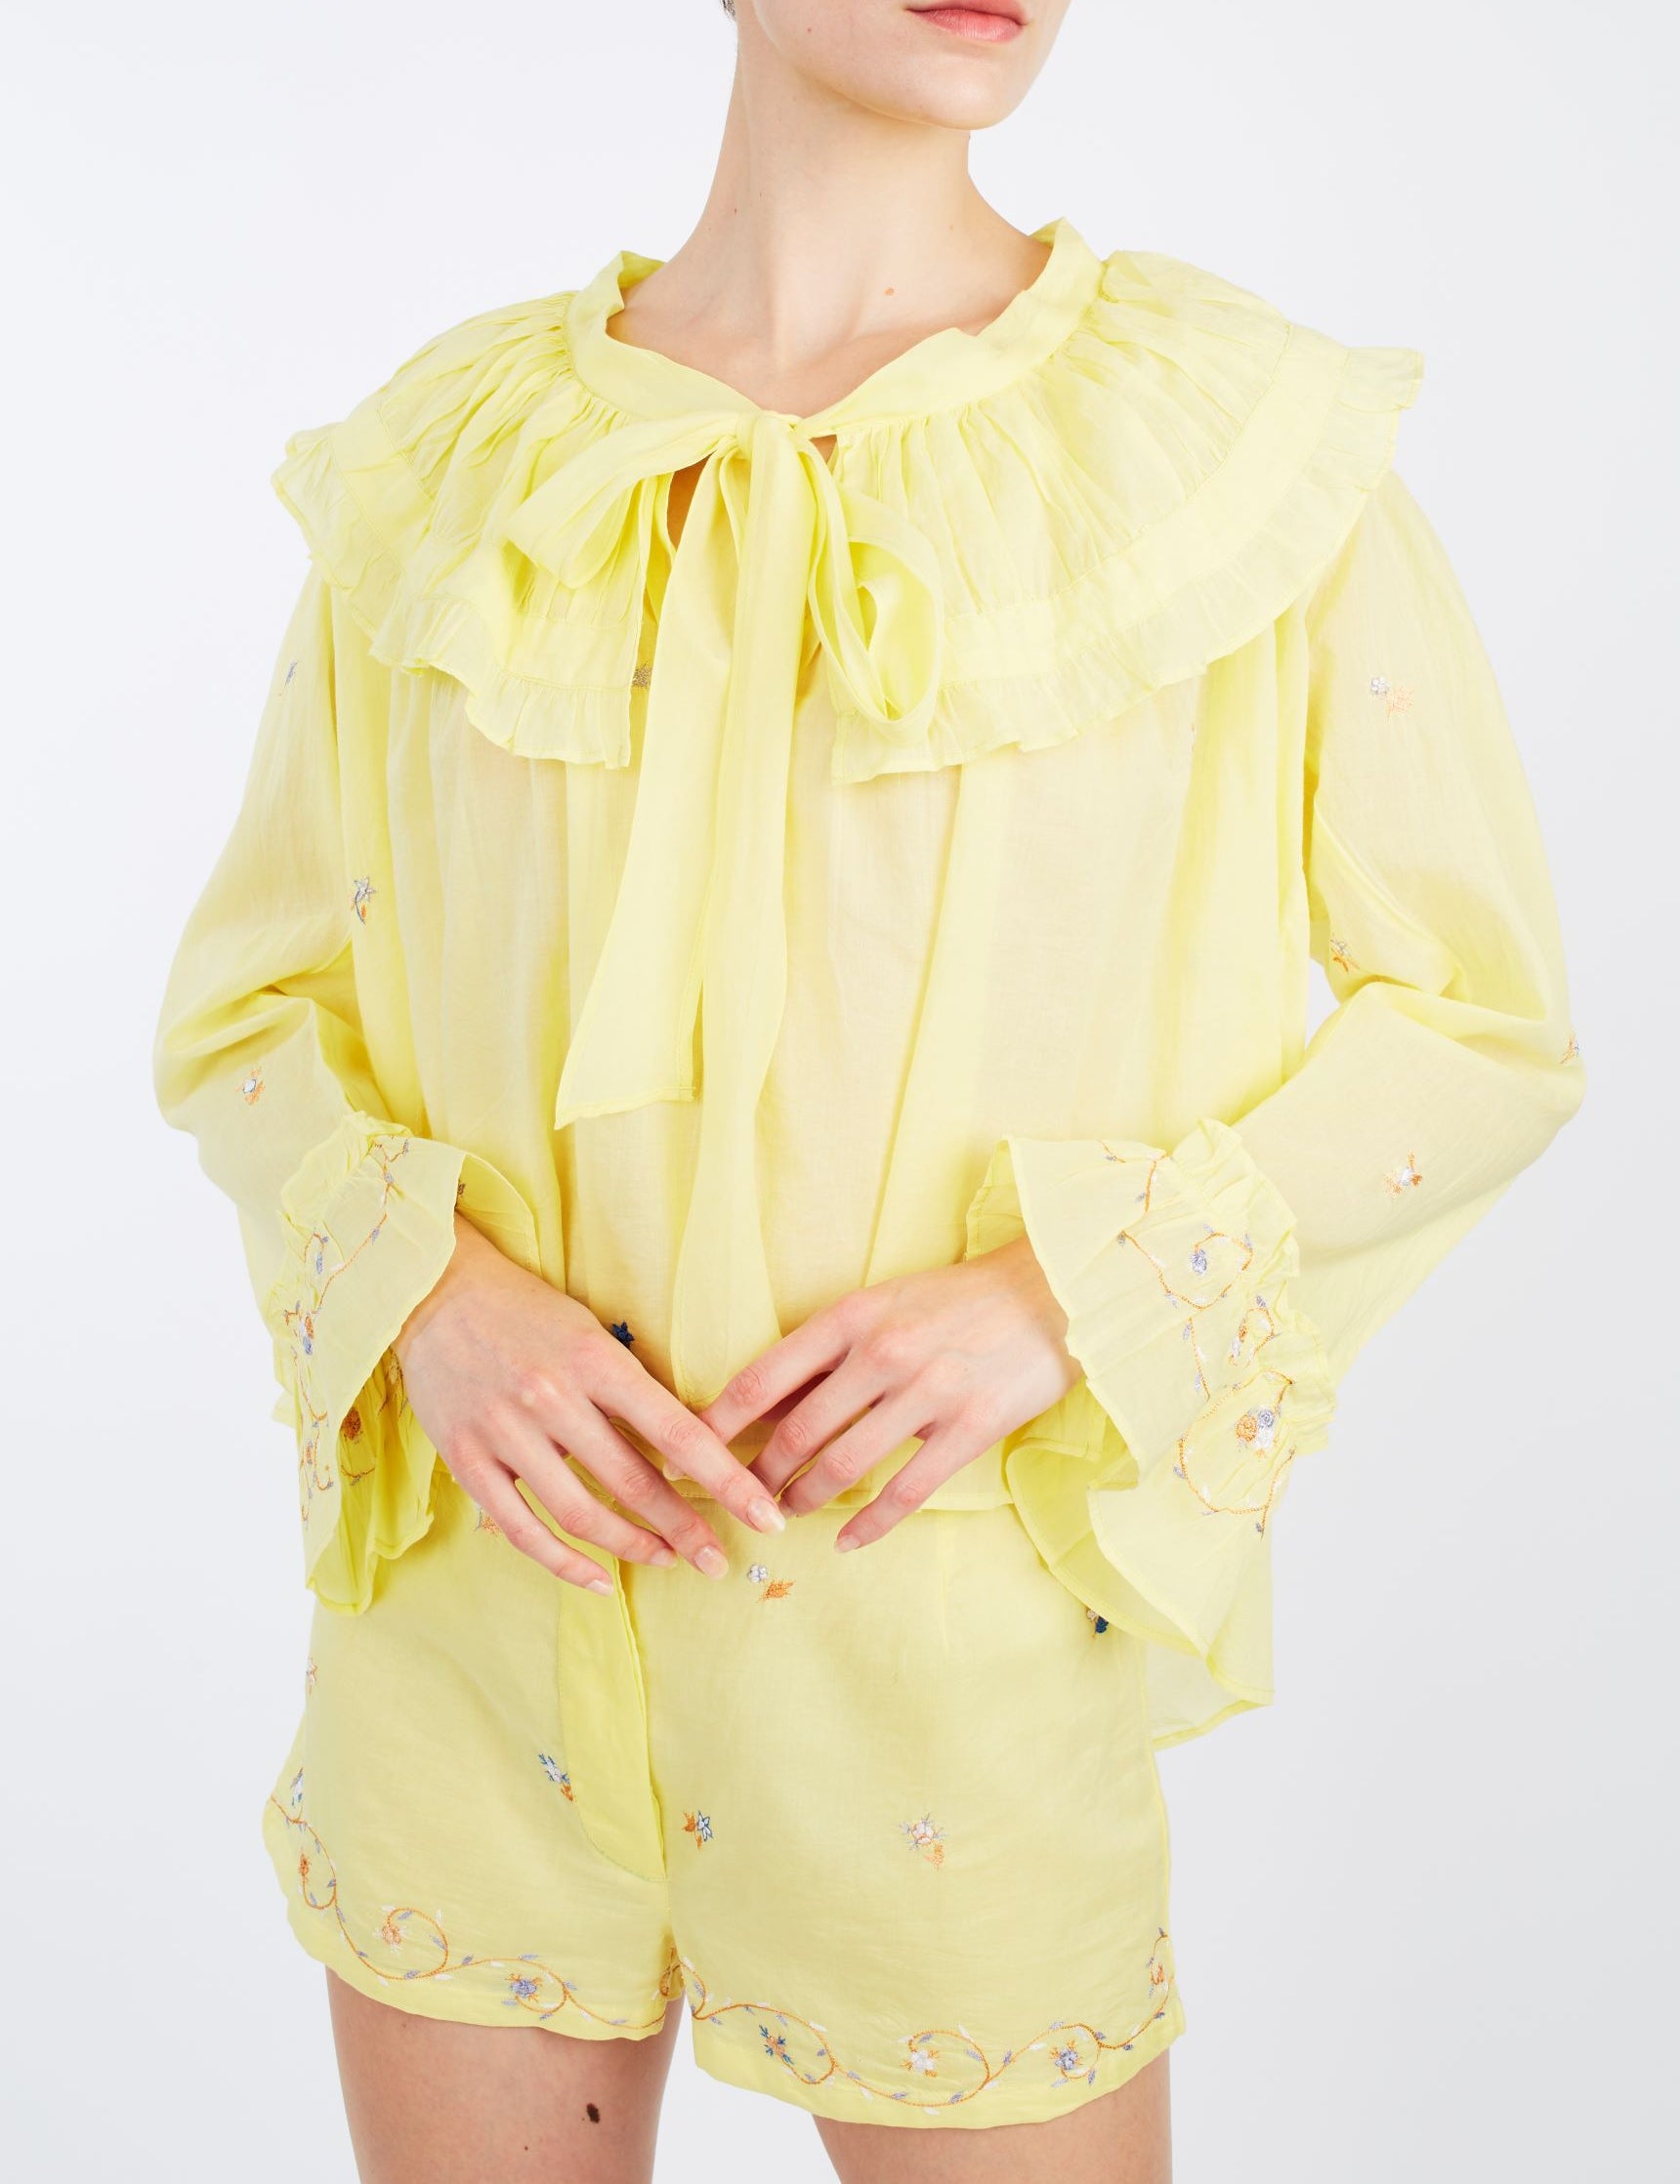 Dauphine Sweet Lemon blouse by Thierry Colson